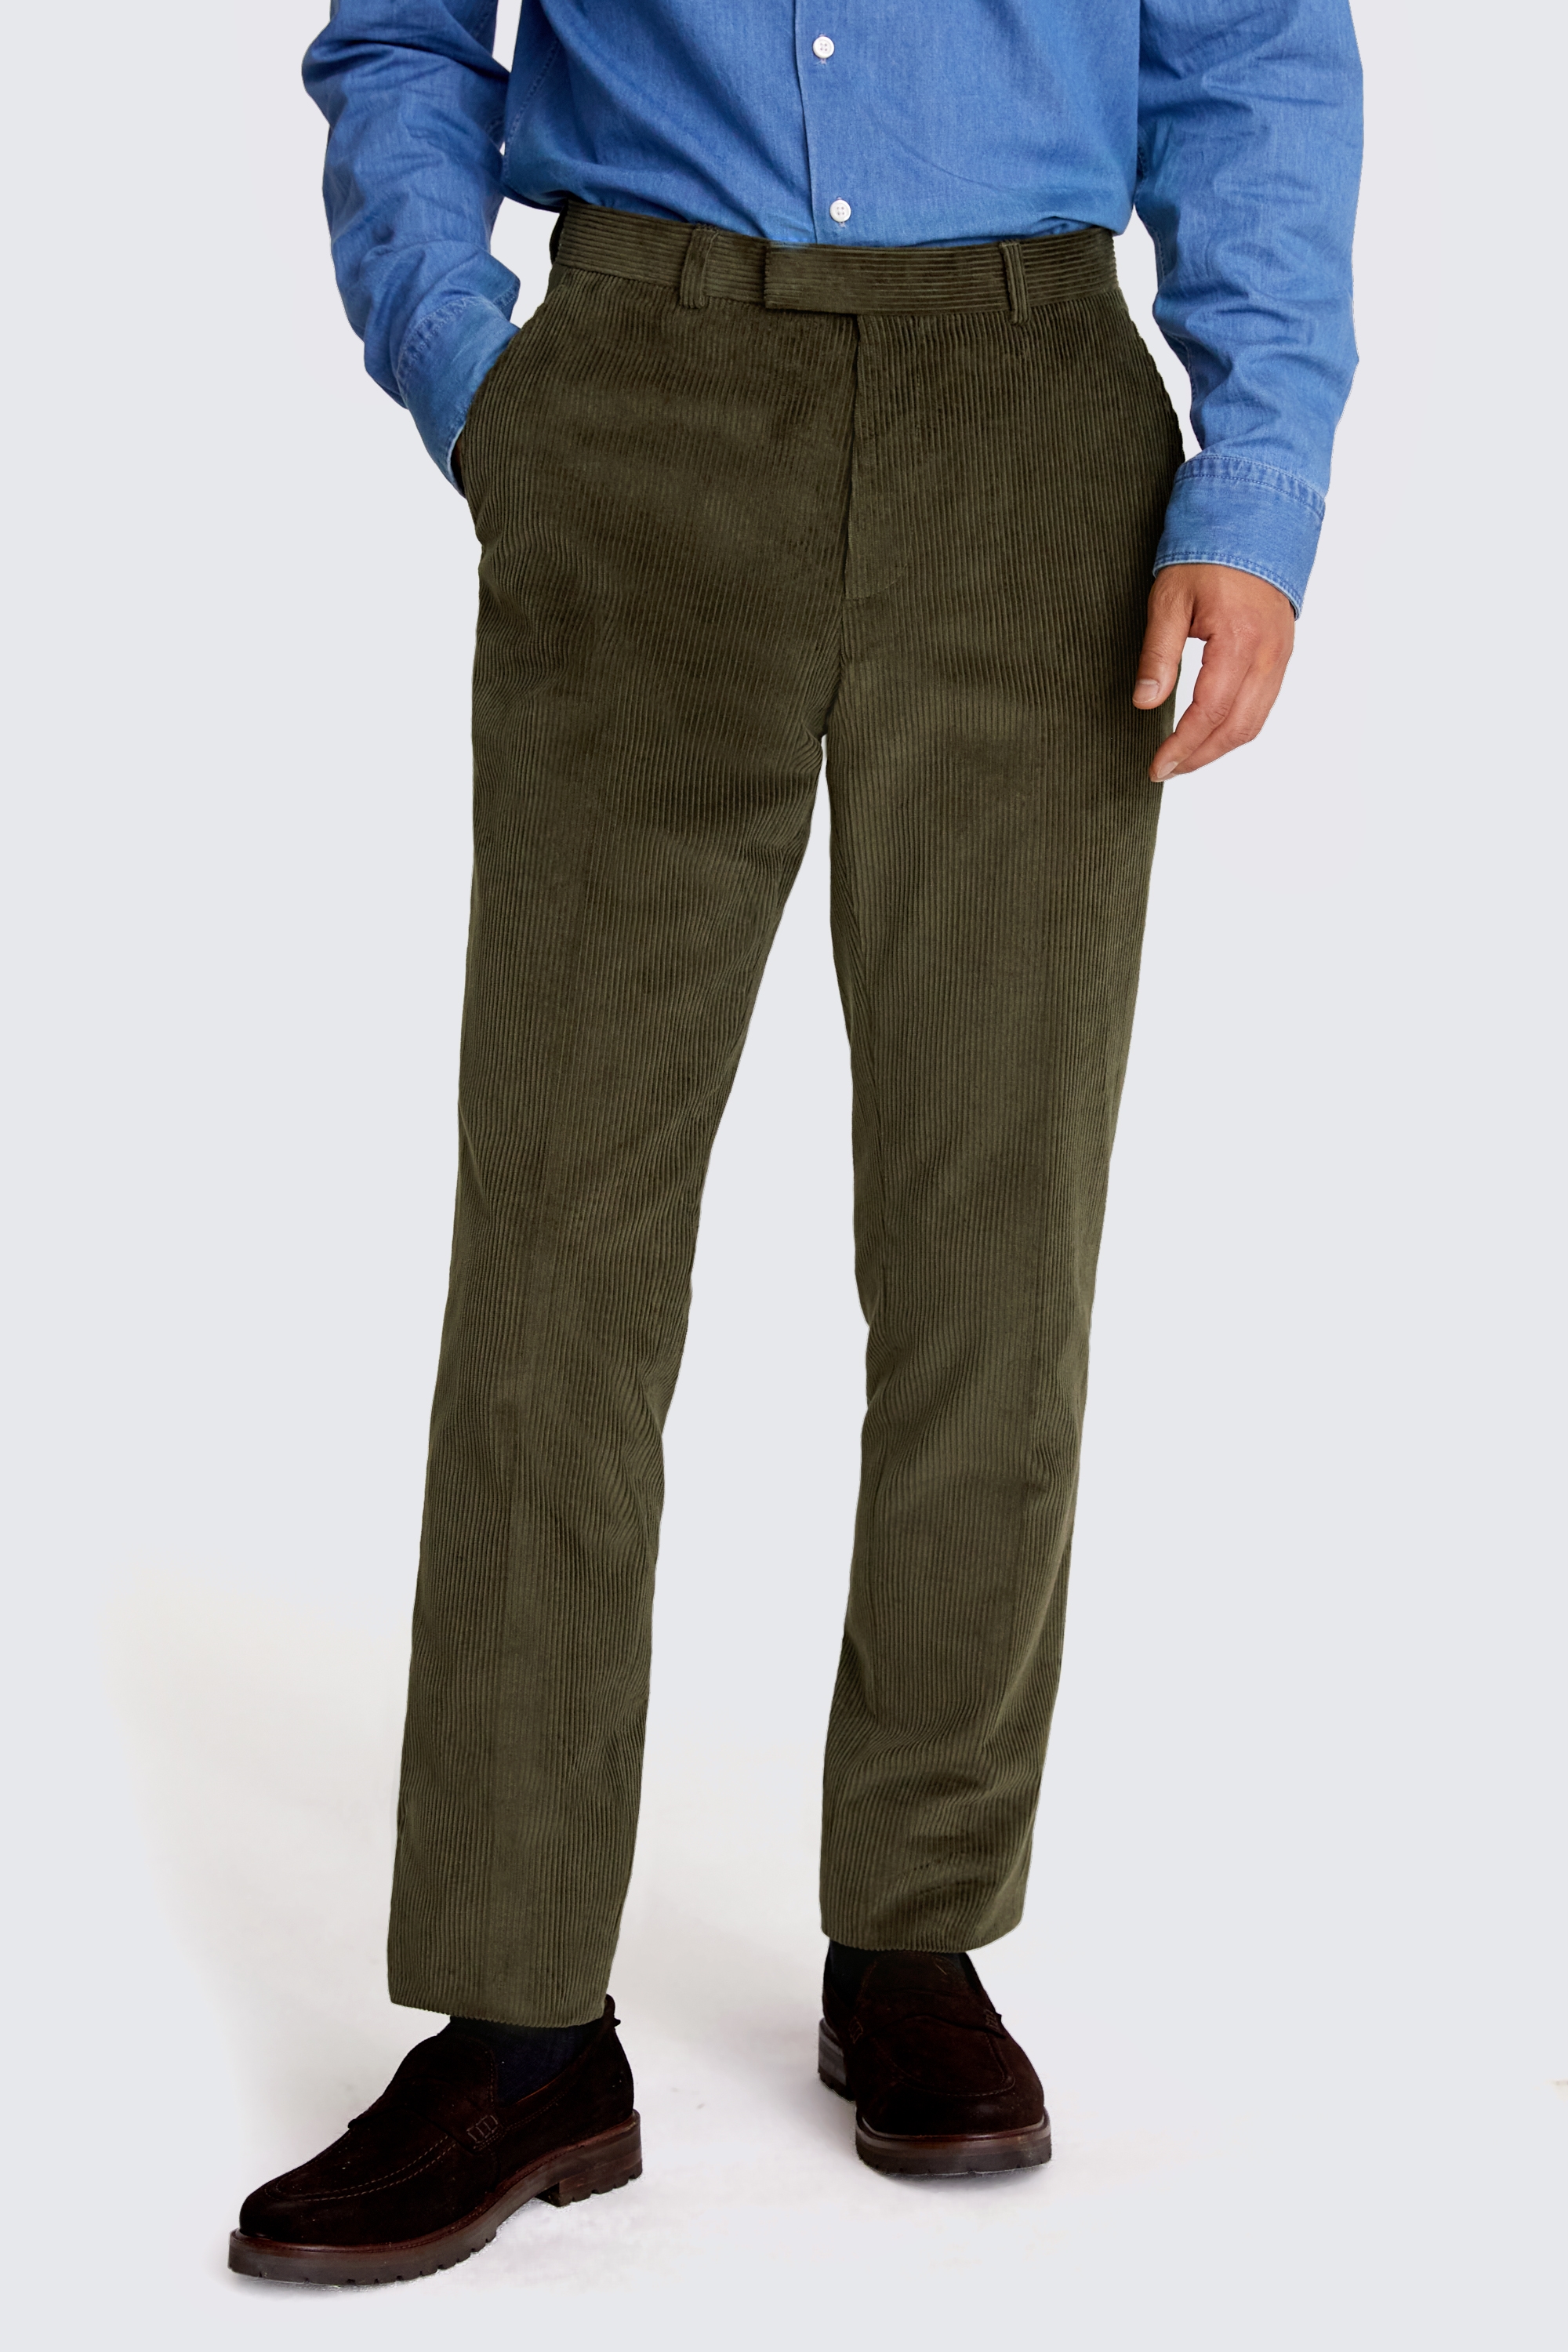 Tailored Fit Olive Corduroy Trousers | Buy Online at Moss